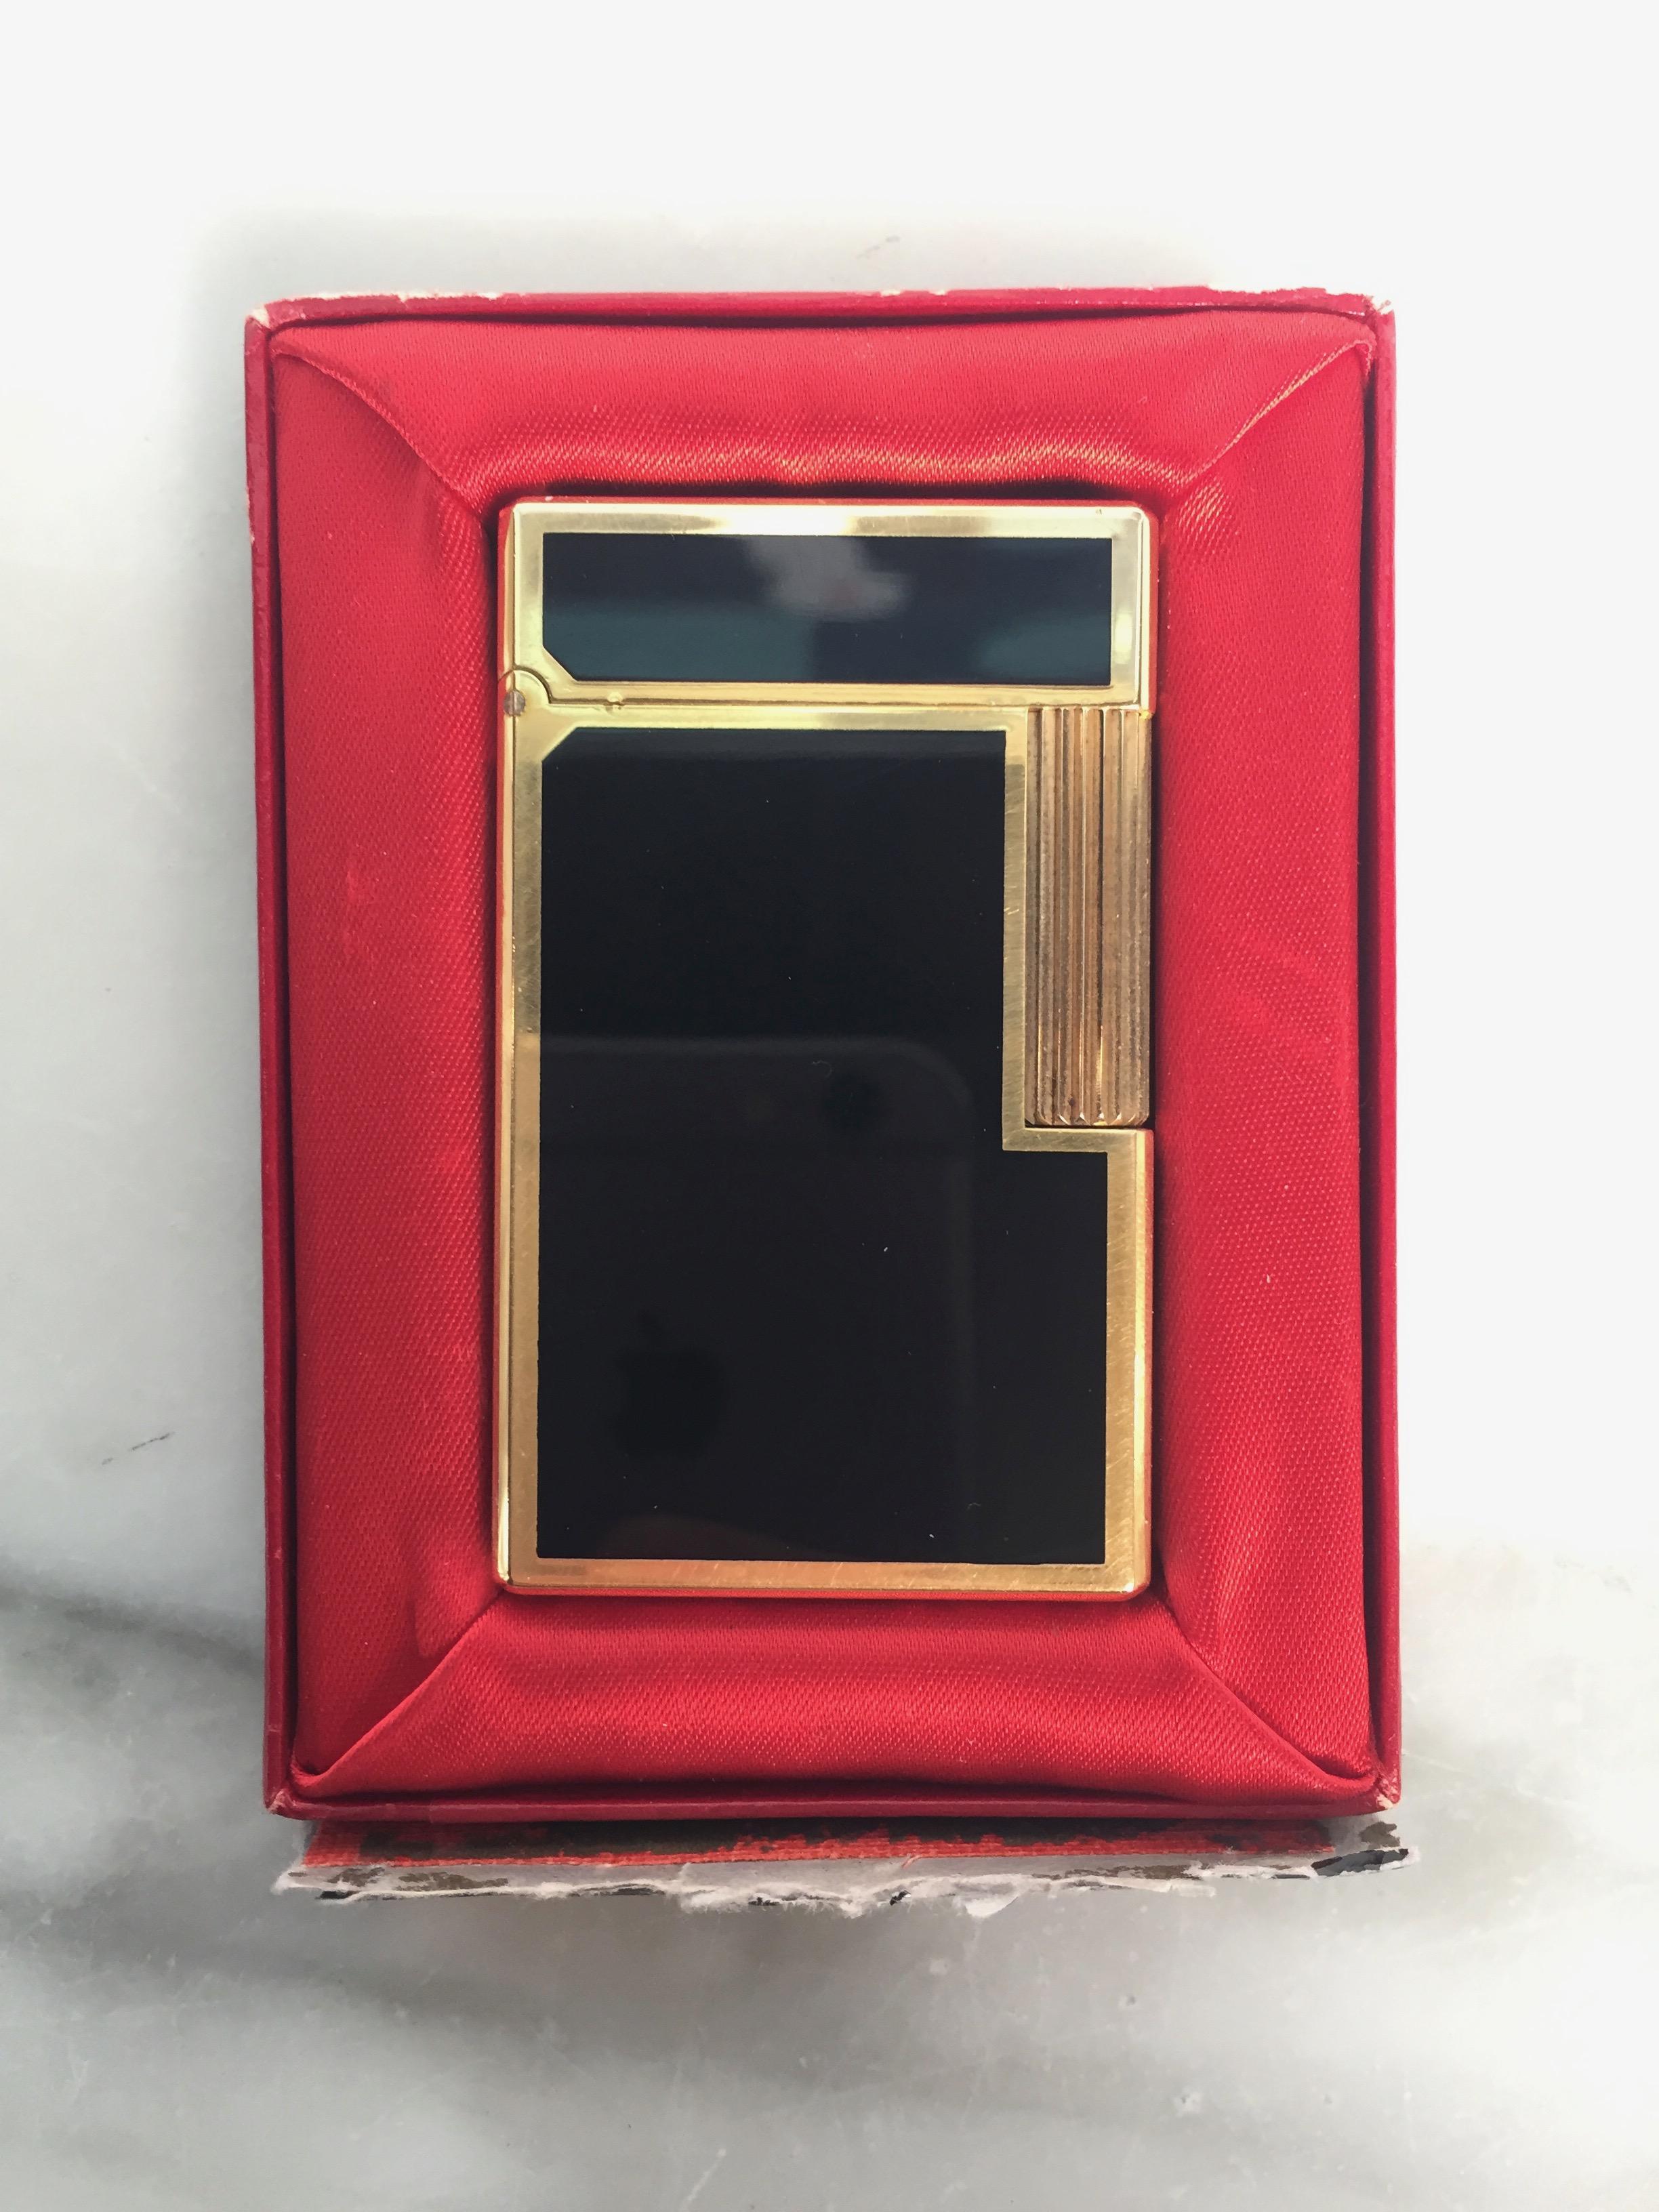 This vintage ST Dupont lighter is sleek in design and compact in size. Featuring black and a luxe gilded trim and signature branding, this lightweight staple will make a welcome addition to your everyday essentials. This lighter comes in the box